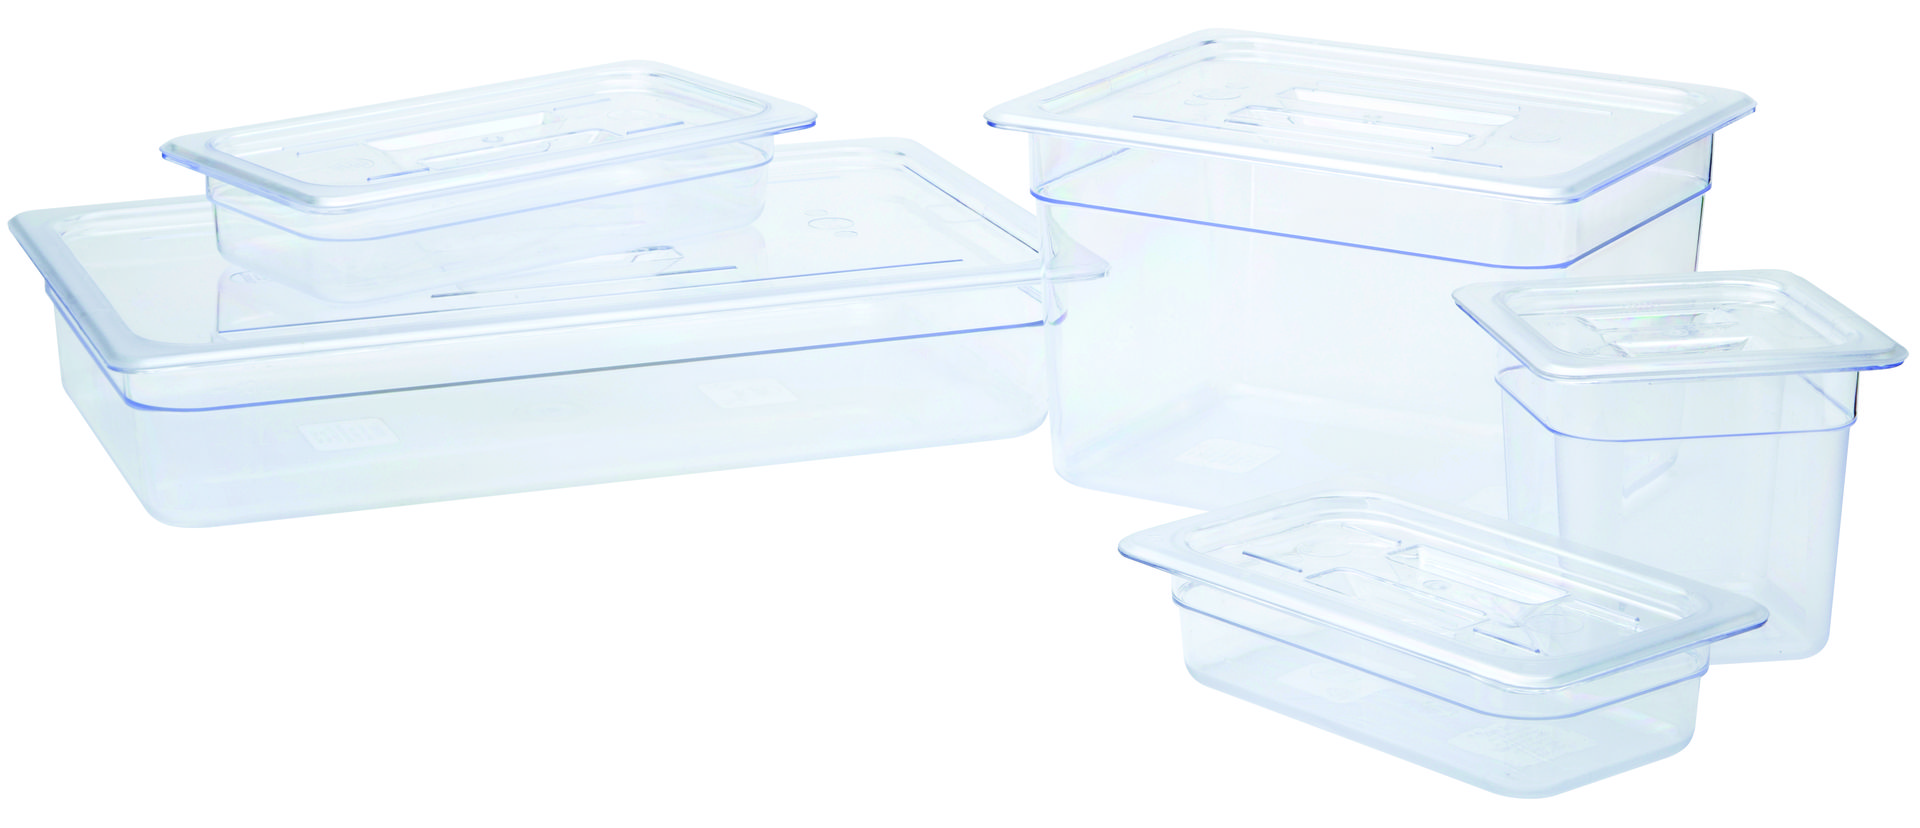 Polycarbonate 1/1GN Pan 6.5cm Deep Clear - CA10200B07-00-B01006 (Pack of 6)